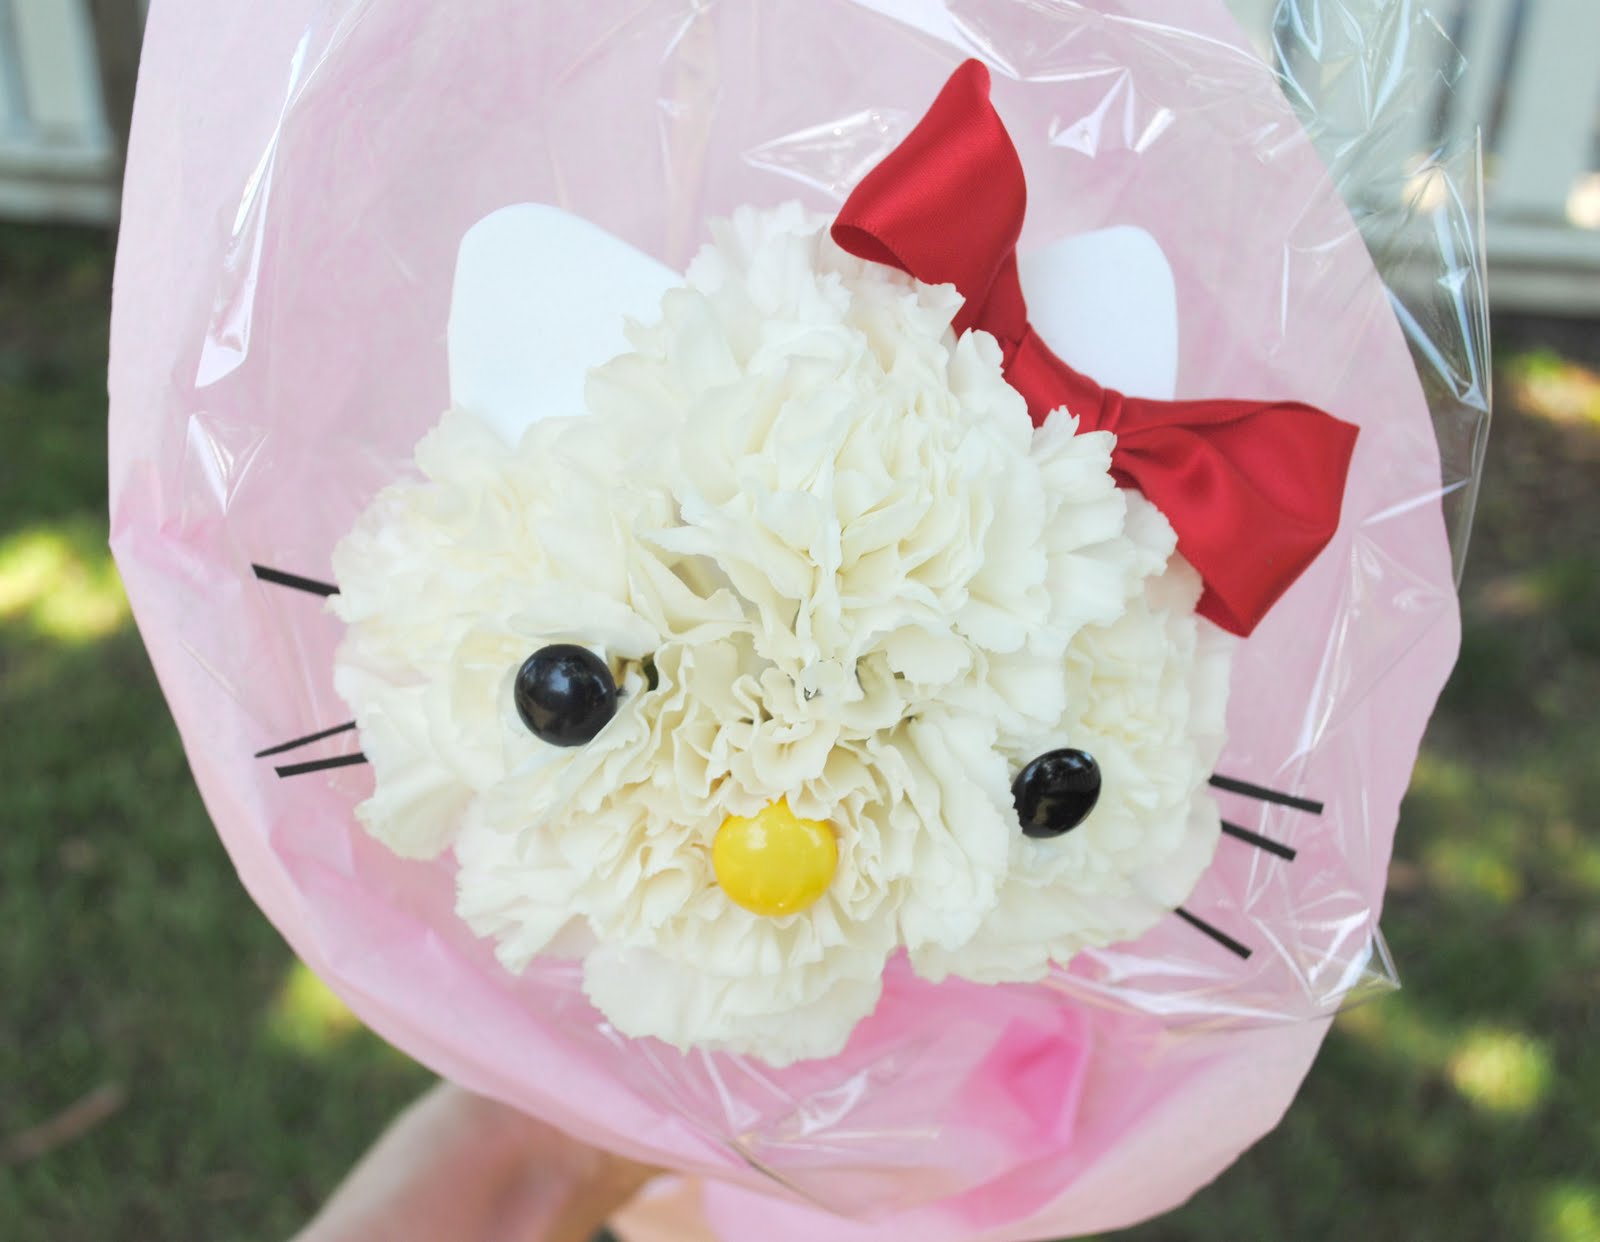 How trendy items can get on the hello kitty bouquet